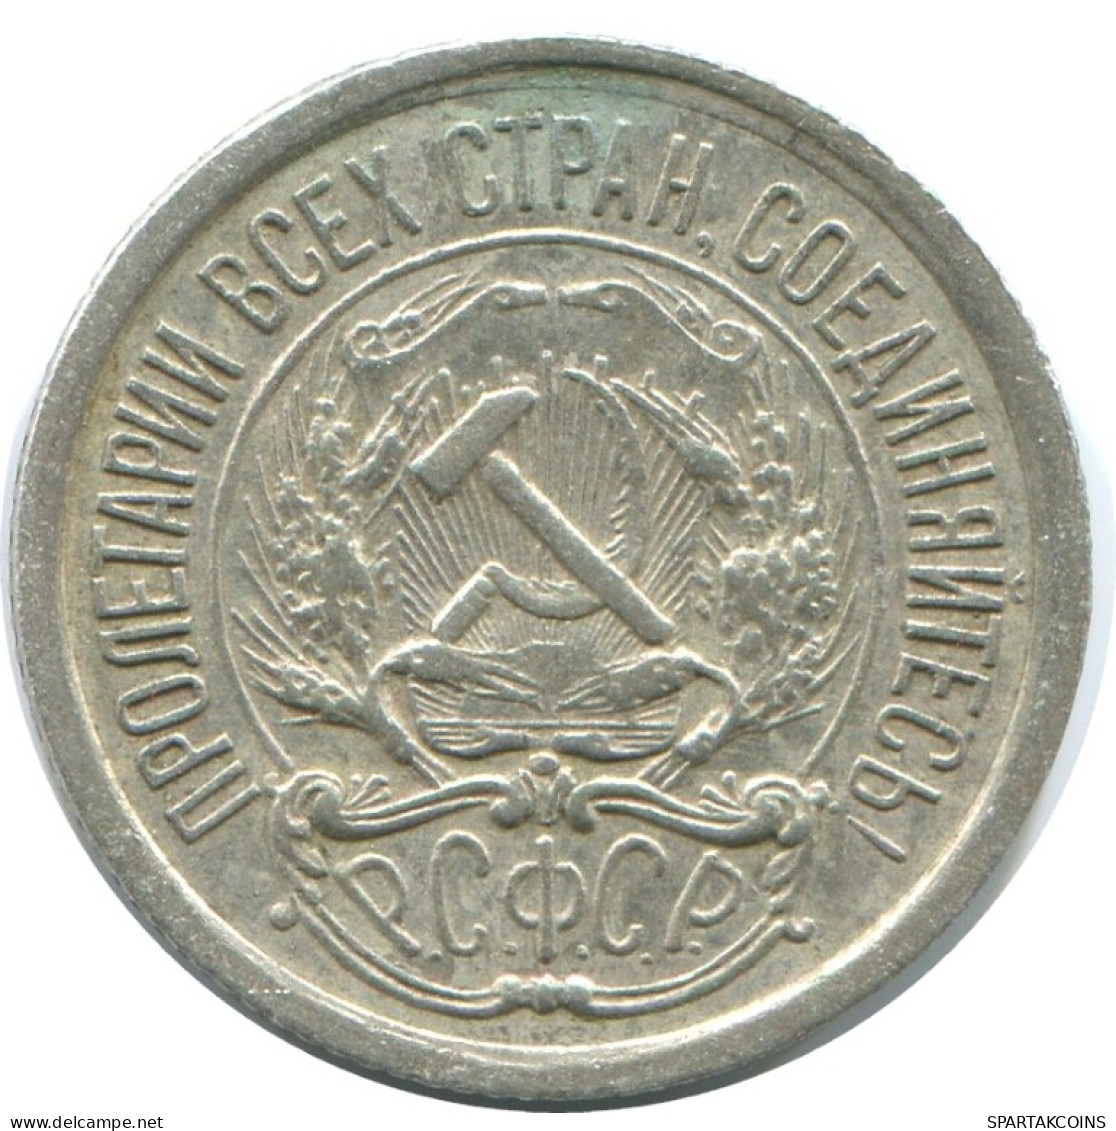 10 KOPEKS 1923 RUSSIE RUSSIA RSFSR ARGENT Pièce HIGH GRADE #AE912.4.F.A - Rusia